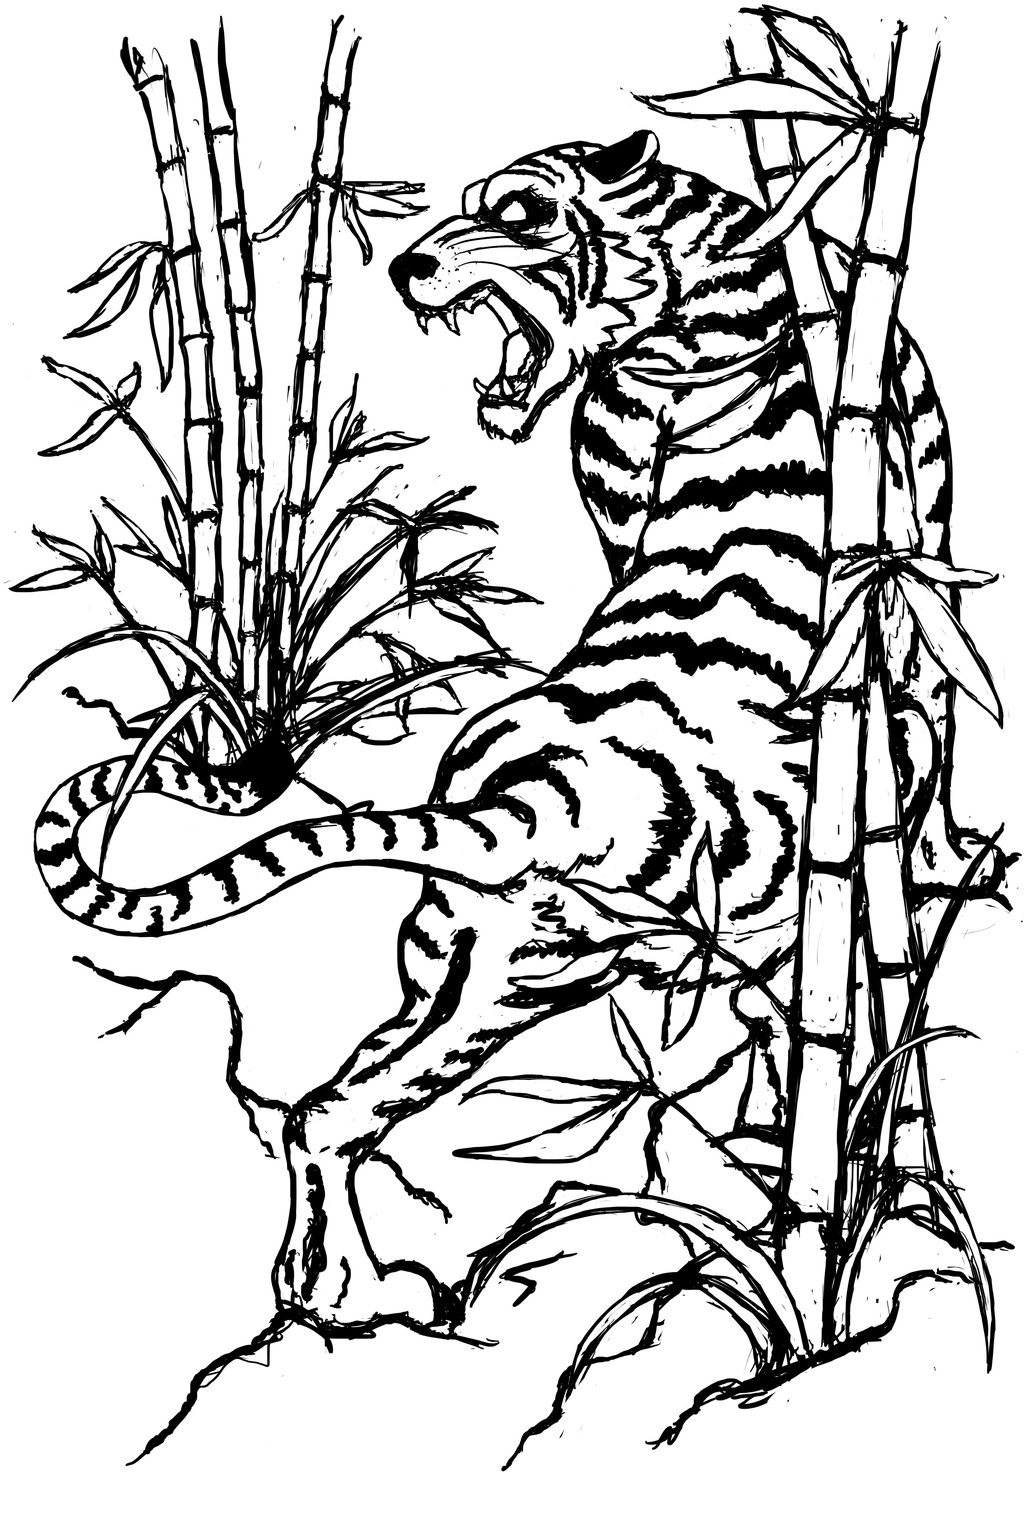 Black Tiger In Bamboo Trees Tattoo Stencil By Jdstone